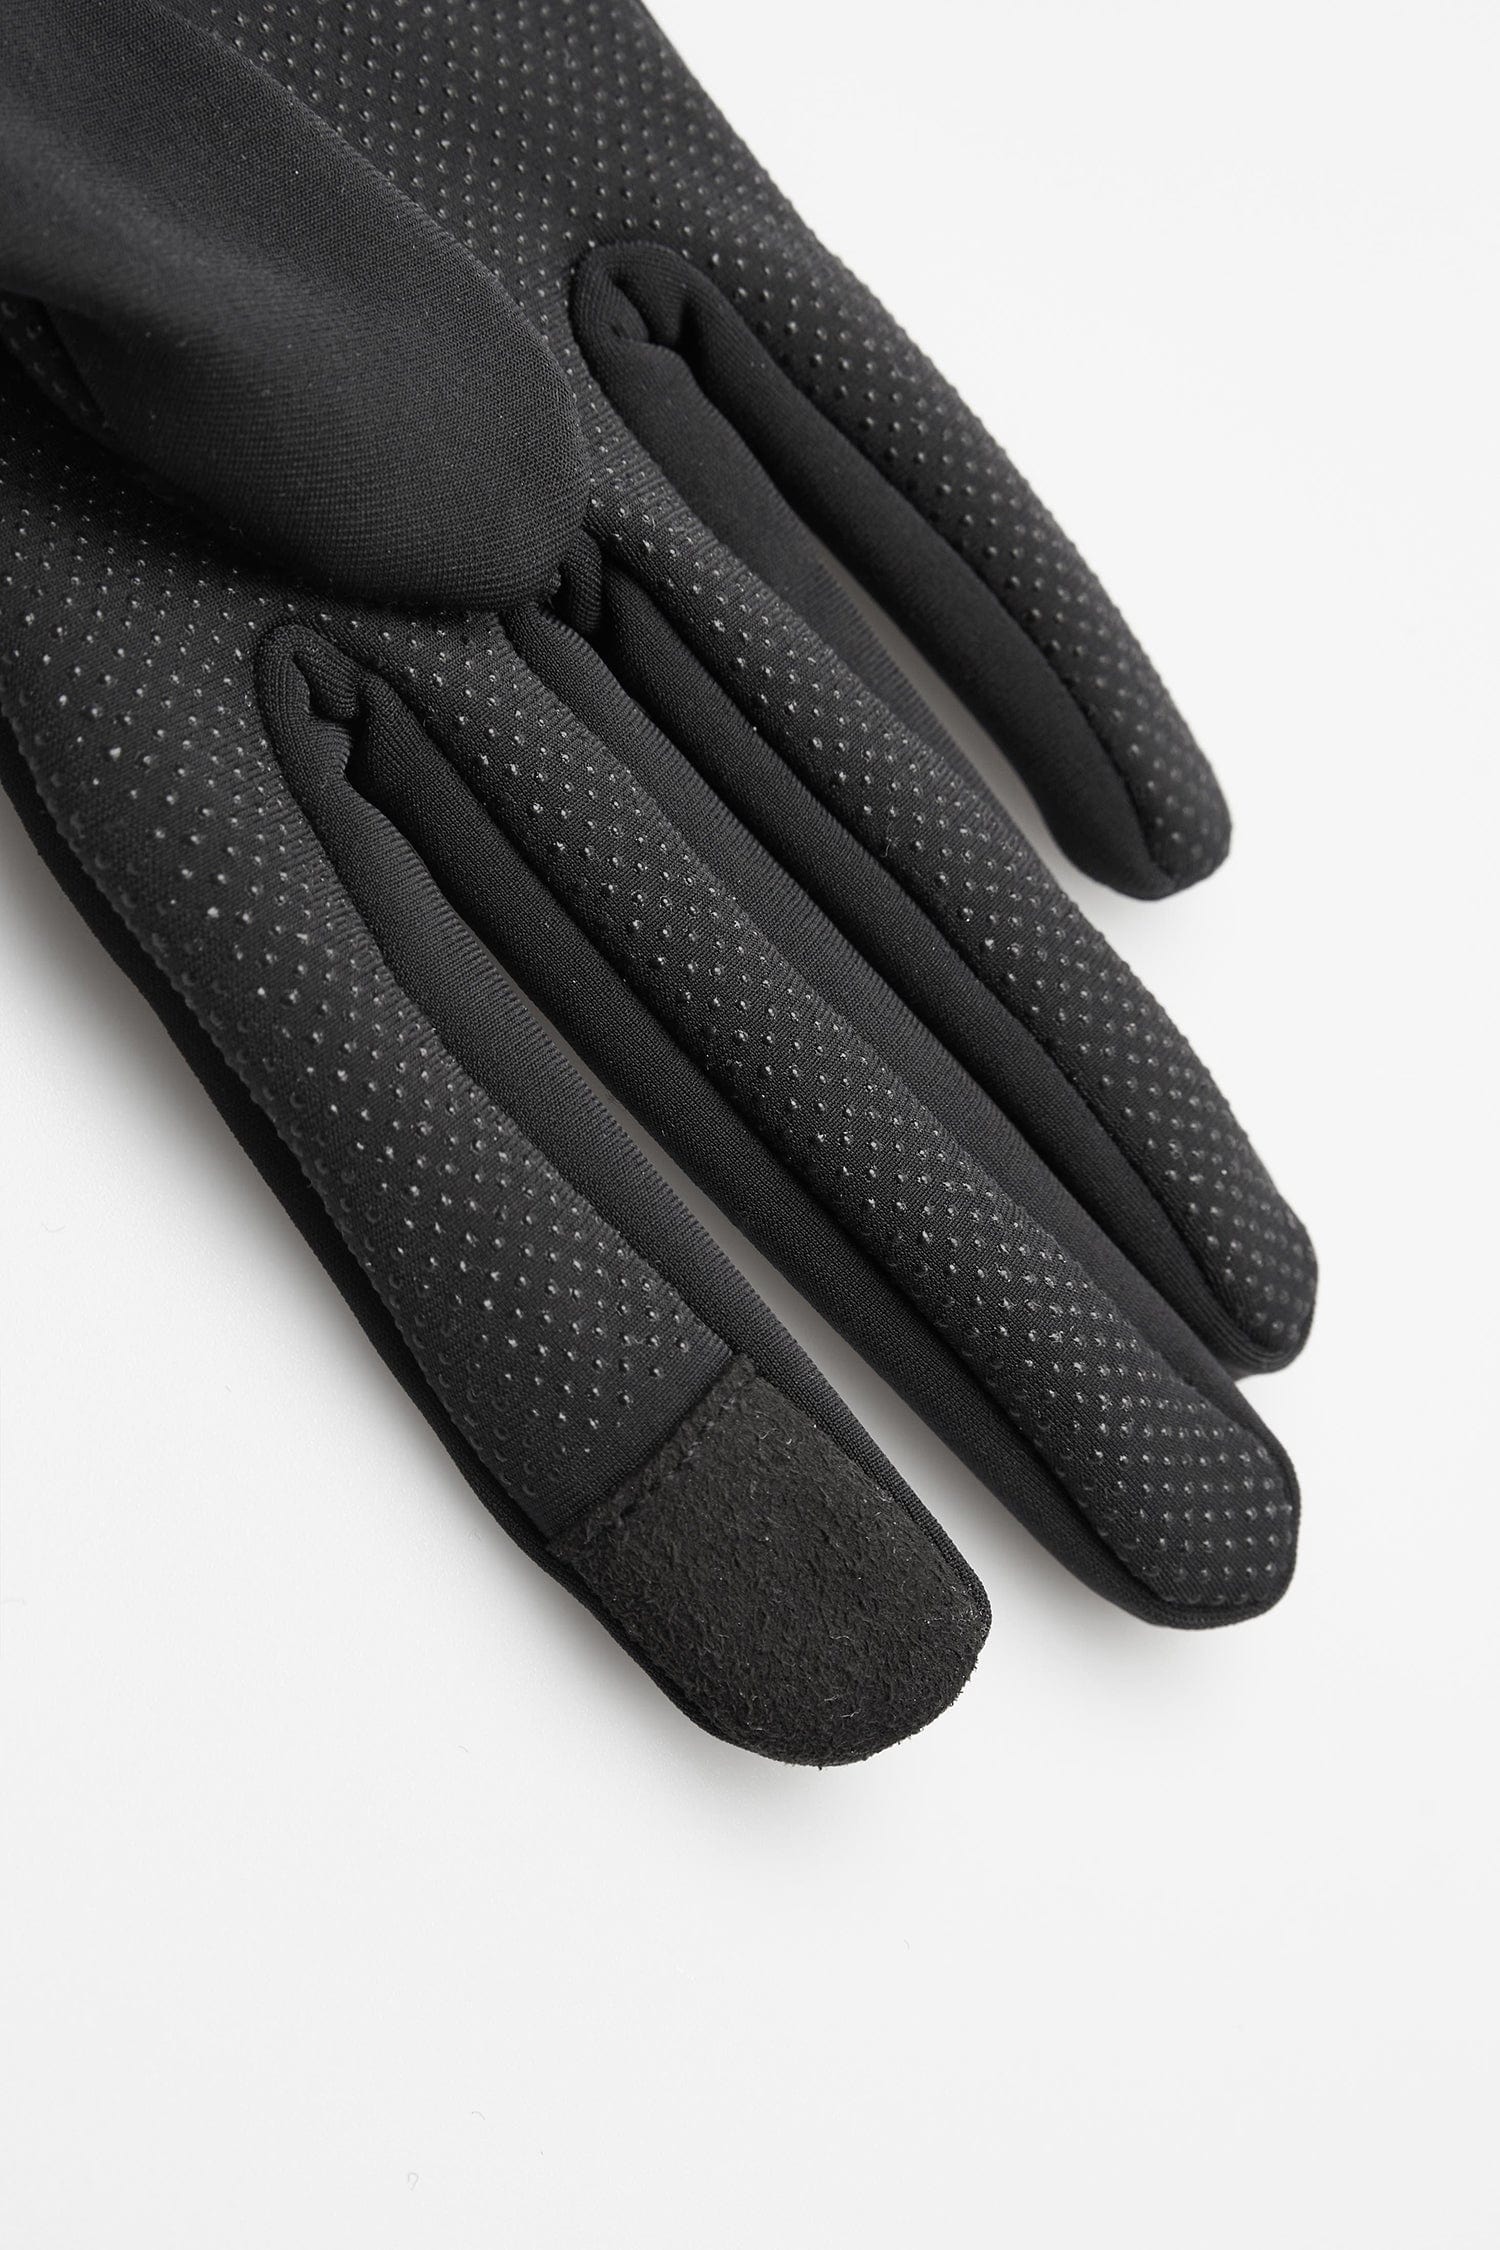 Rockwear Activewear Women's Sports Gloves Black Osfa One Size For  Accessories : : Clothing, Shoes & Accessories